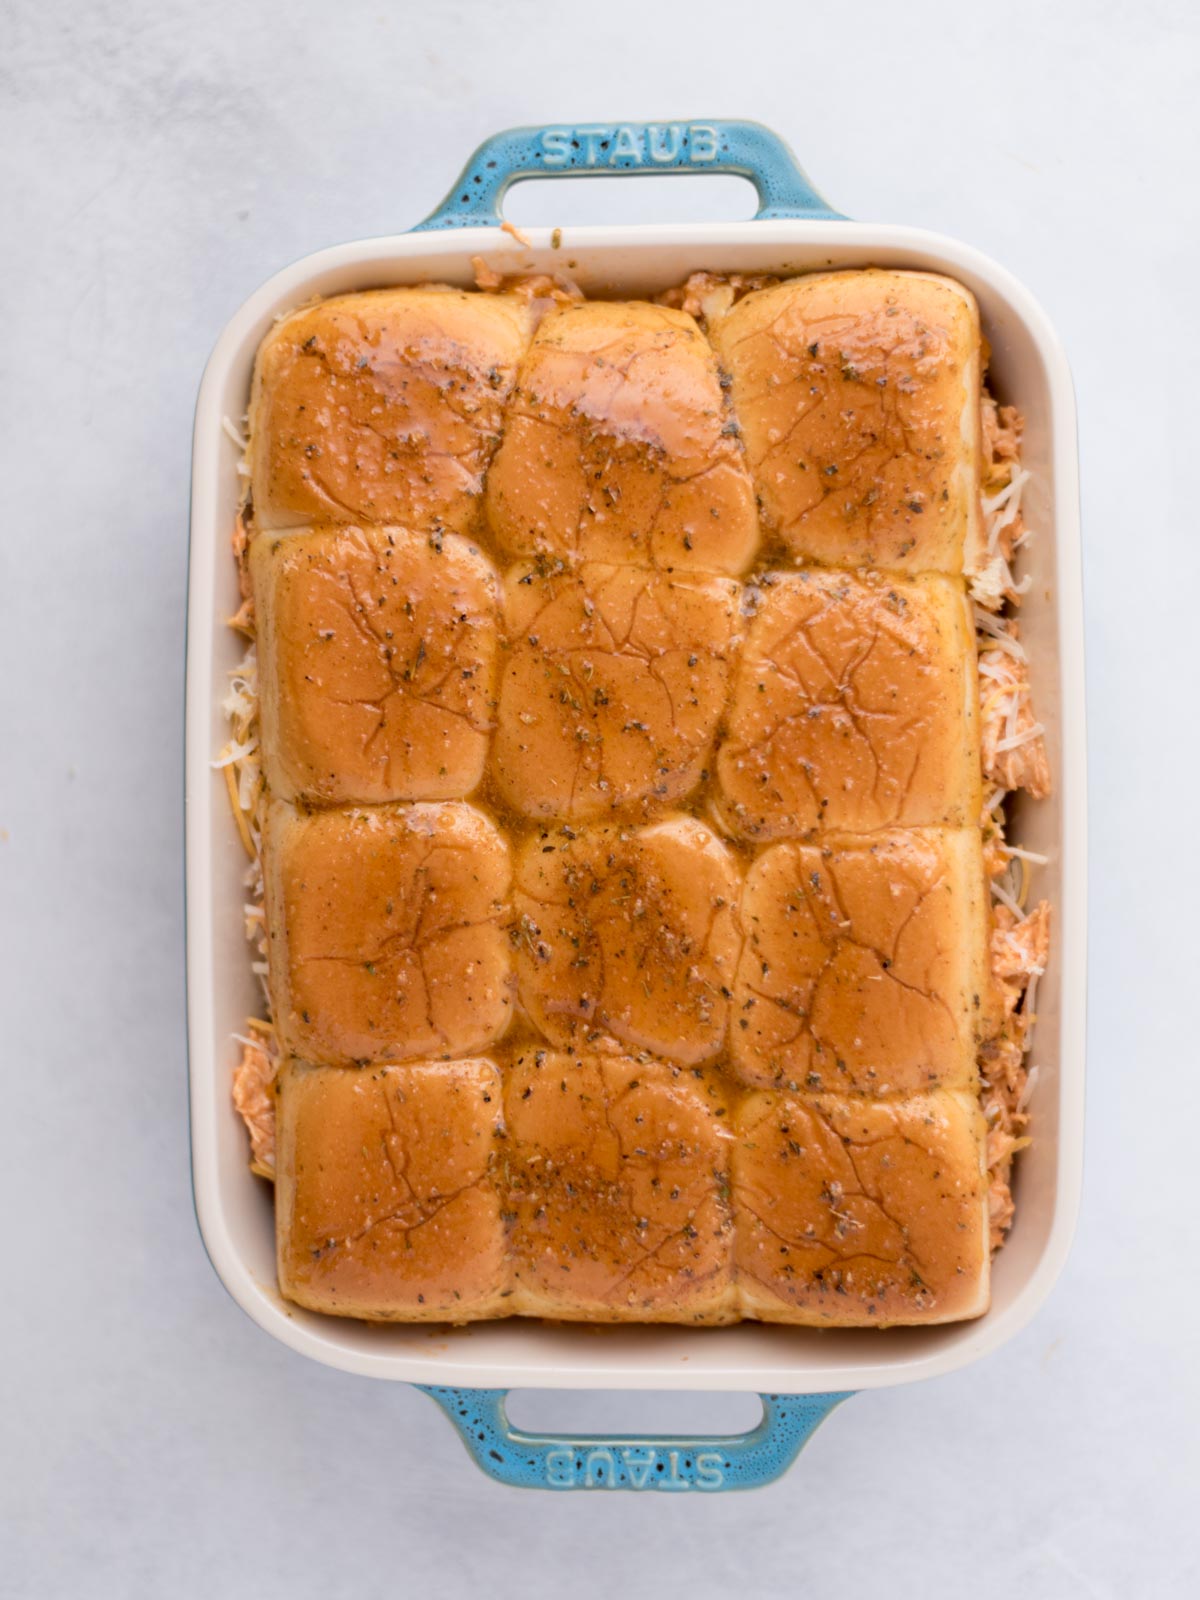 Seasoned melted butter poured over buffalo chicken sliders in a baking dish before baking.